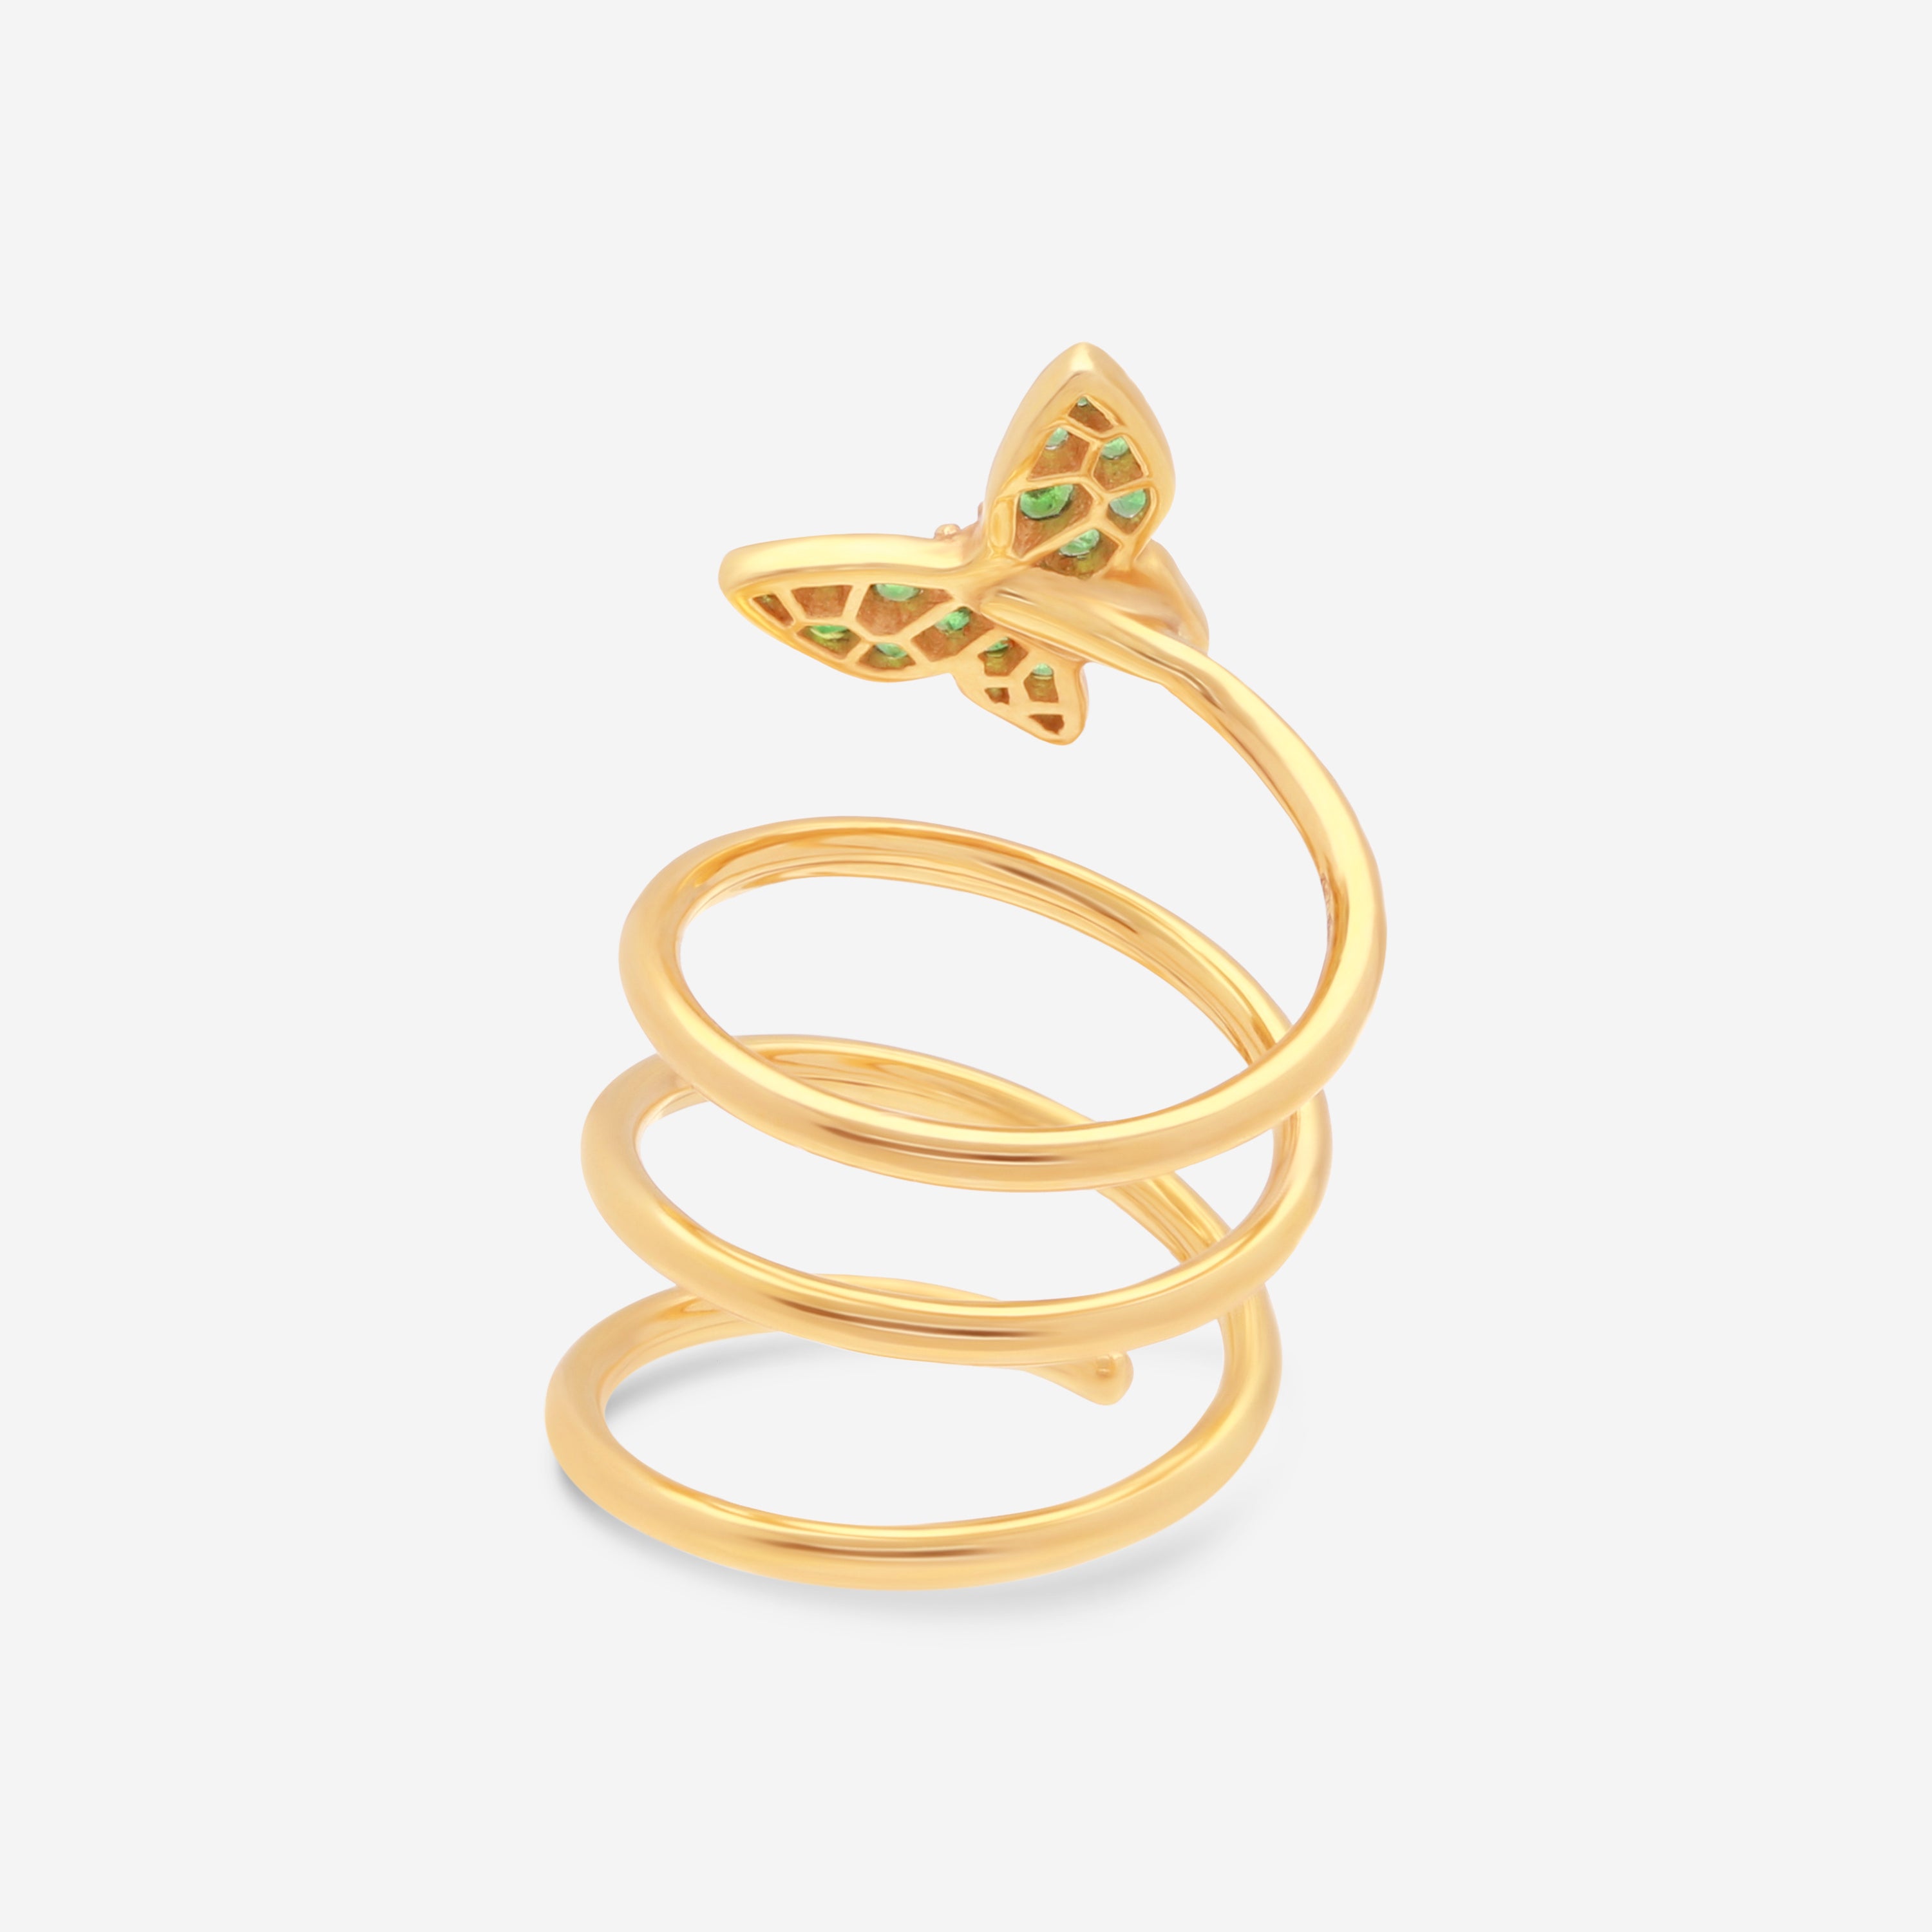 Zydo 18K Yellow Gold Diamond and Emerald Butterfly Coil Ring VIS123